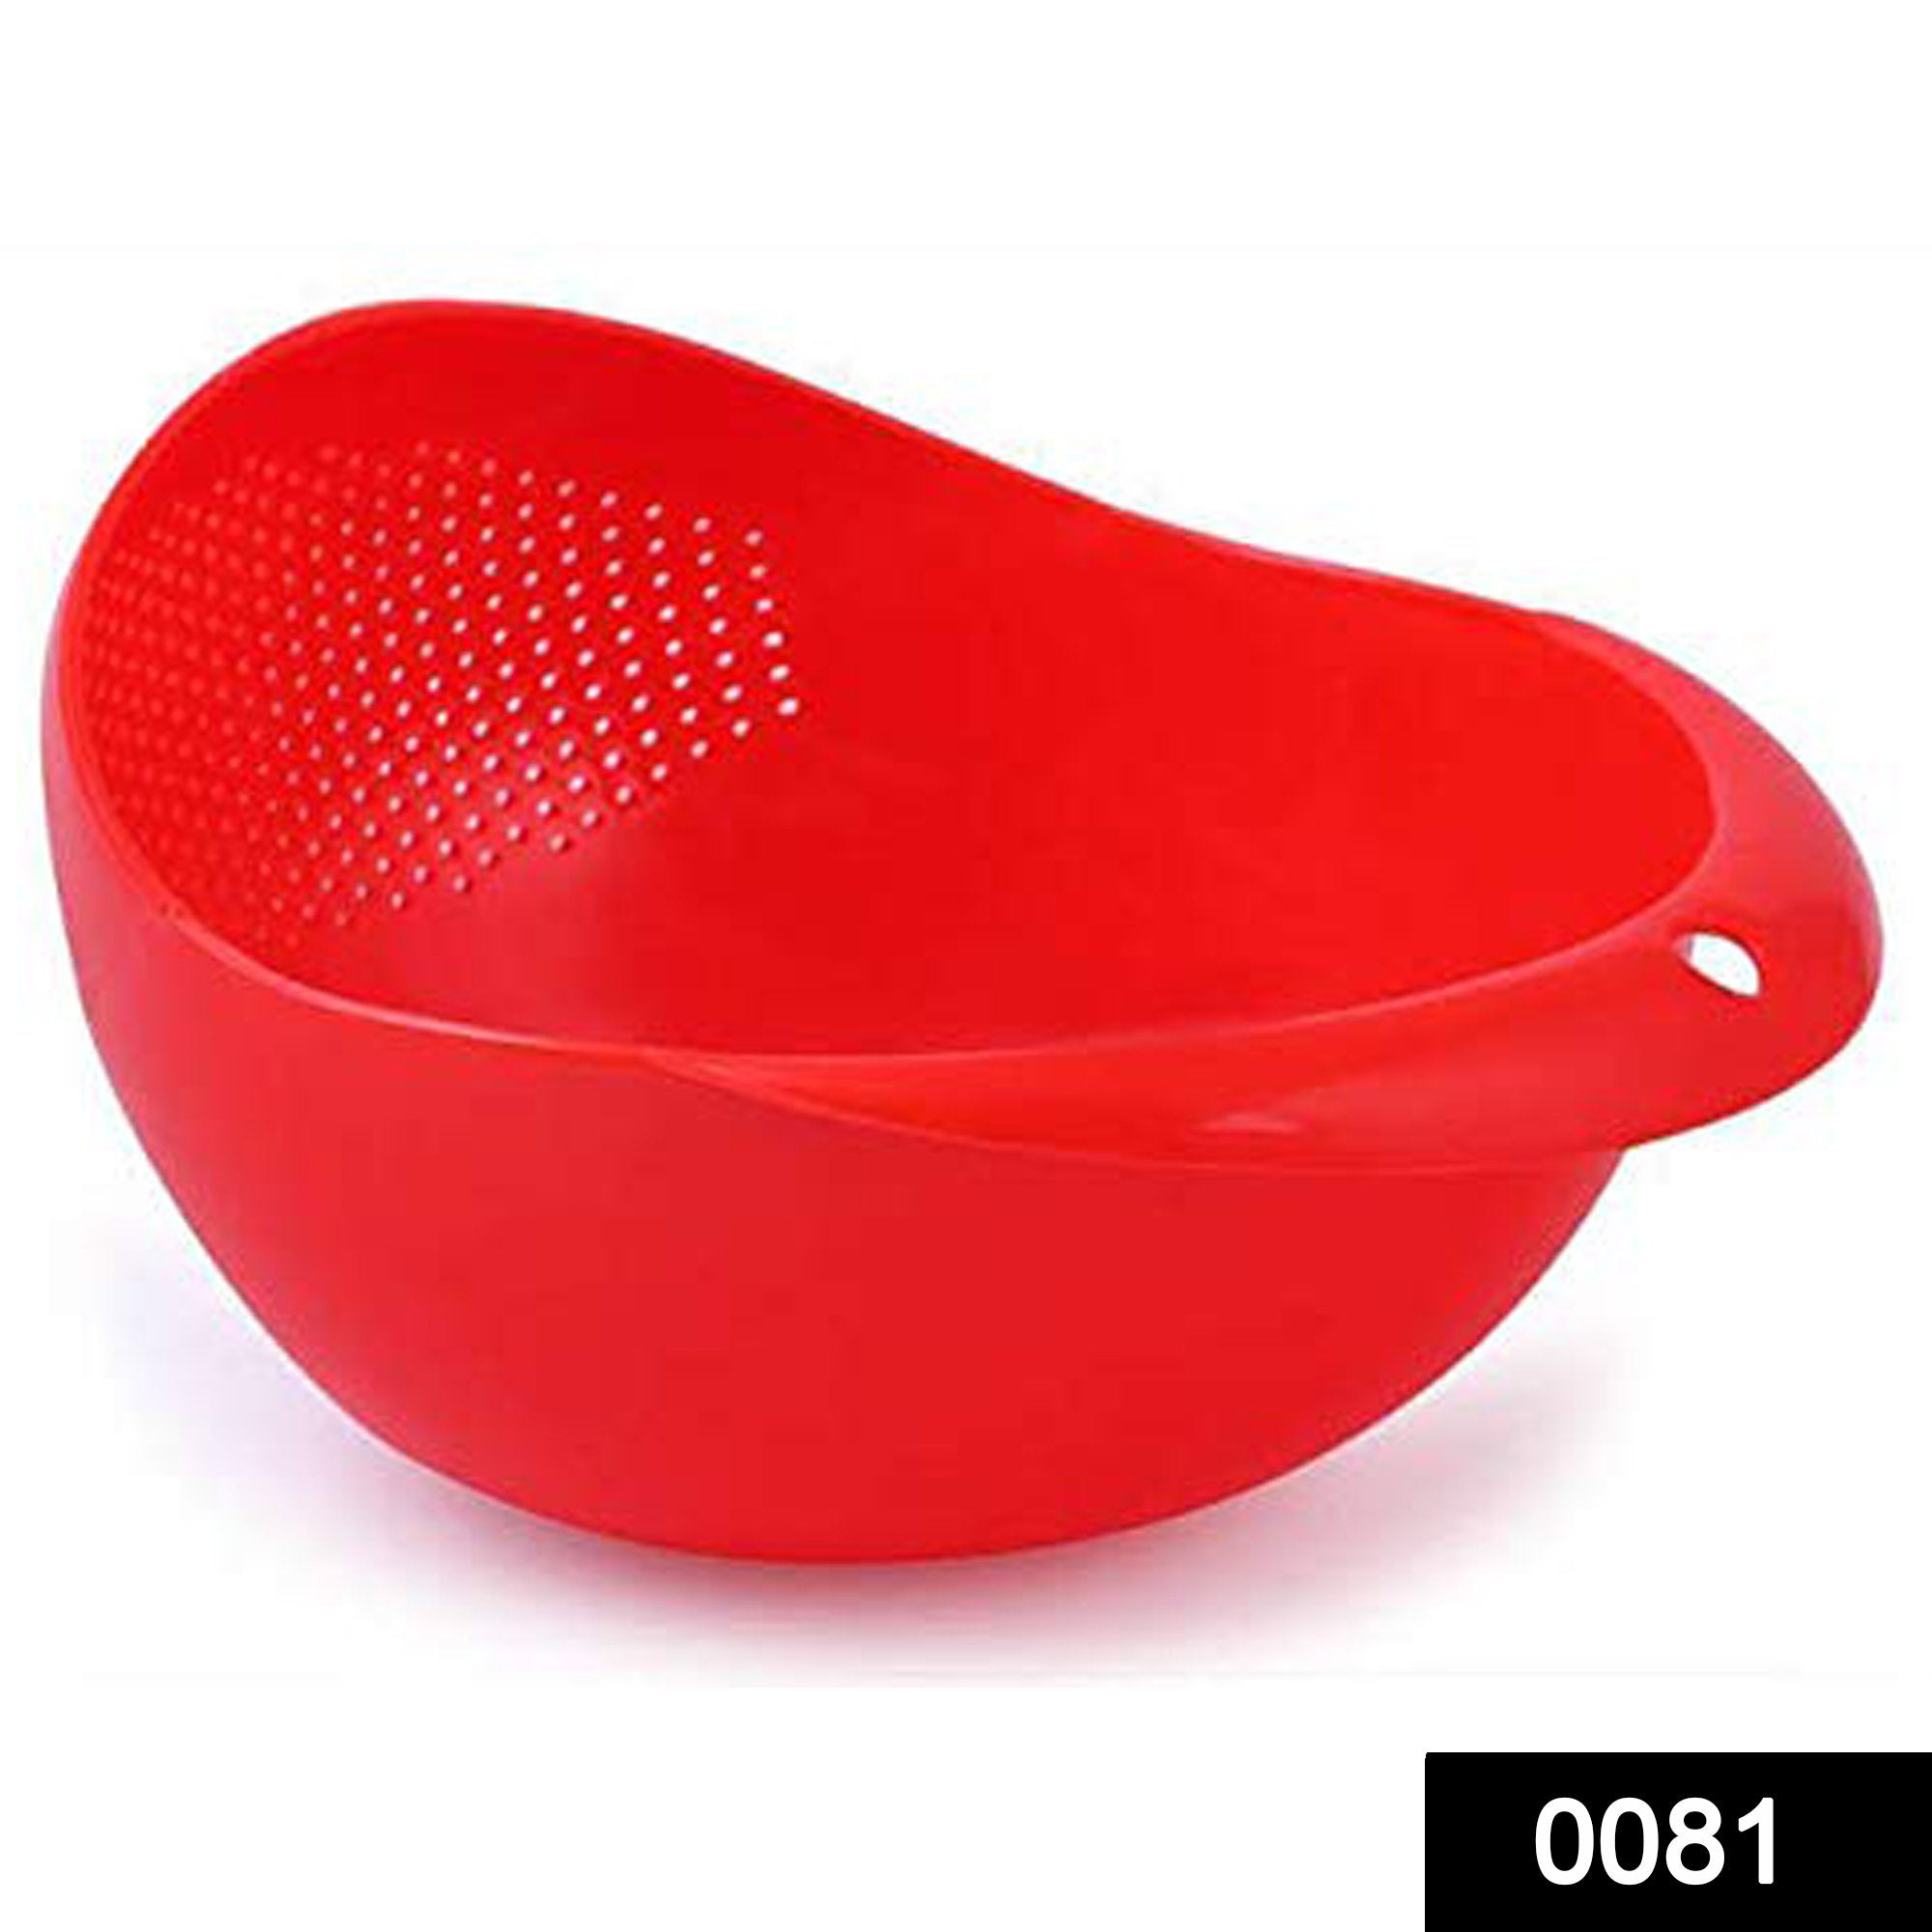 0081A Multi-Function with Integrated Colander Mixing Bowl Washing Rice, Vegetable and Fruits Drainer Bowl-Size: 21x17x8.5cm - SkyShopy